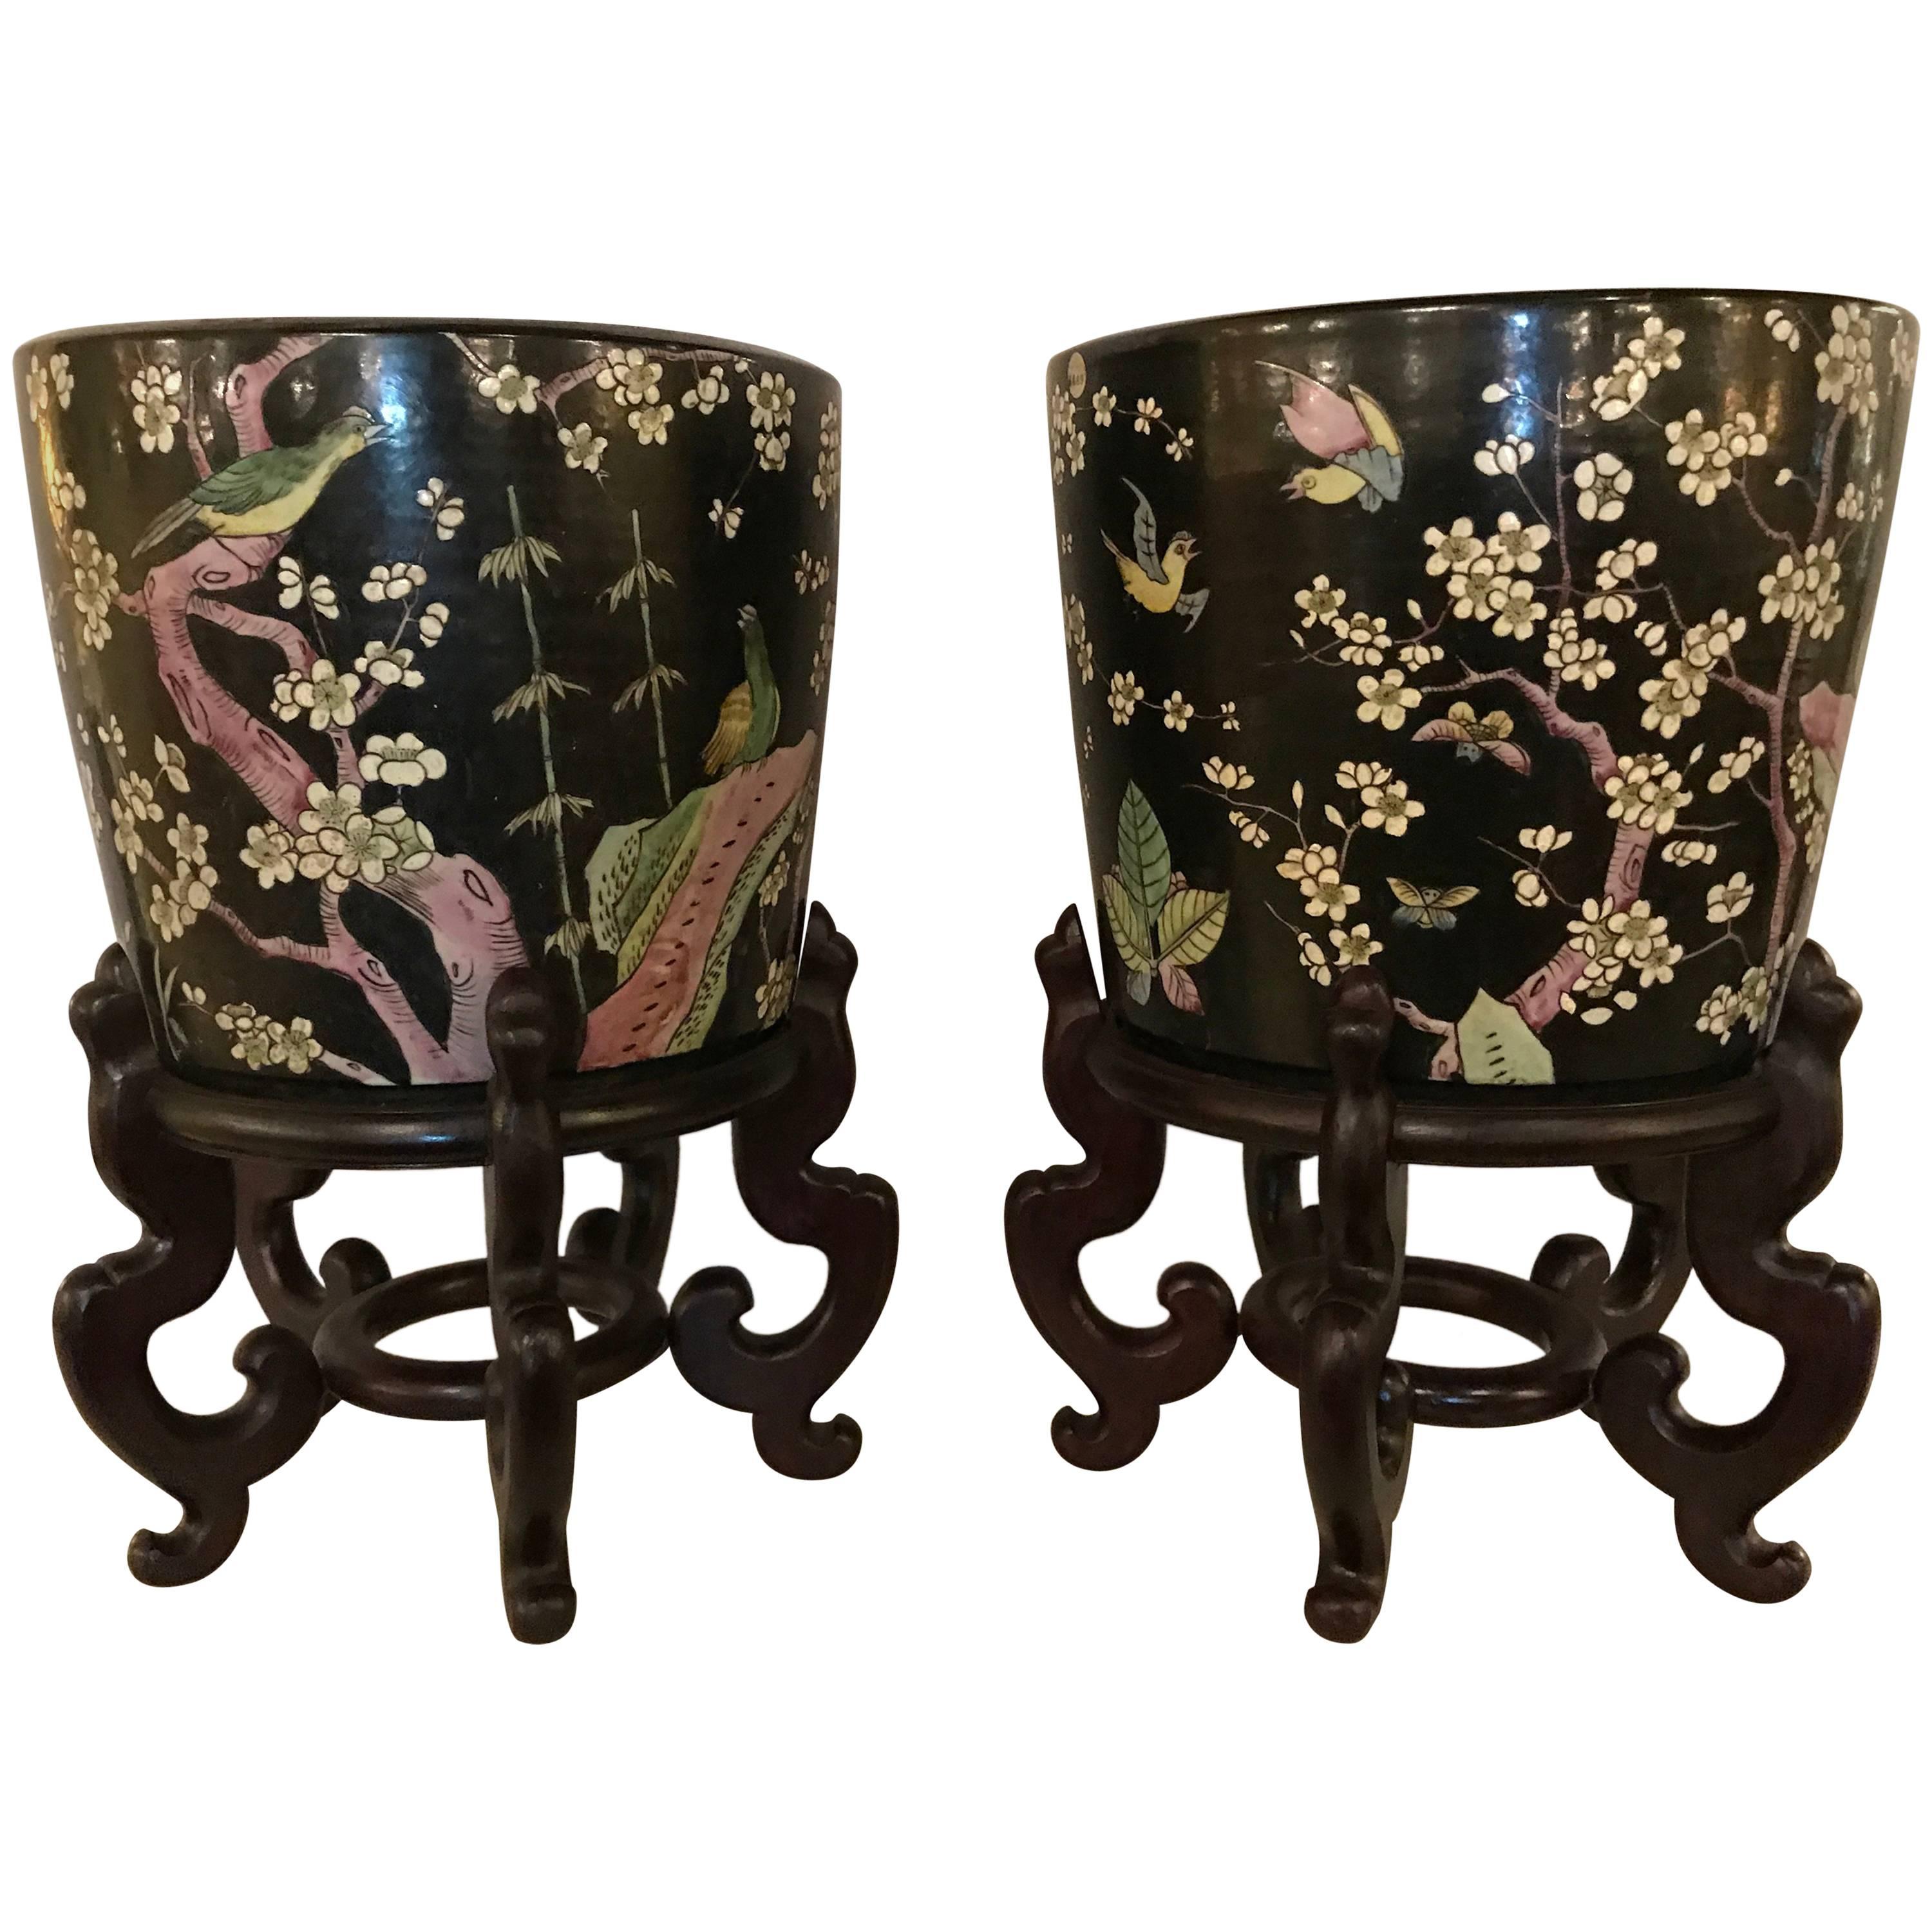 Pair of 19th Century Chinese Jardinière on Rosewood Stand